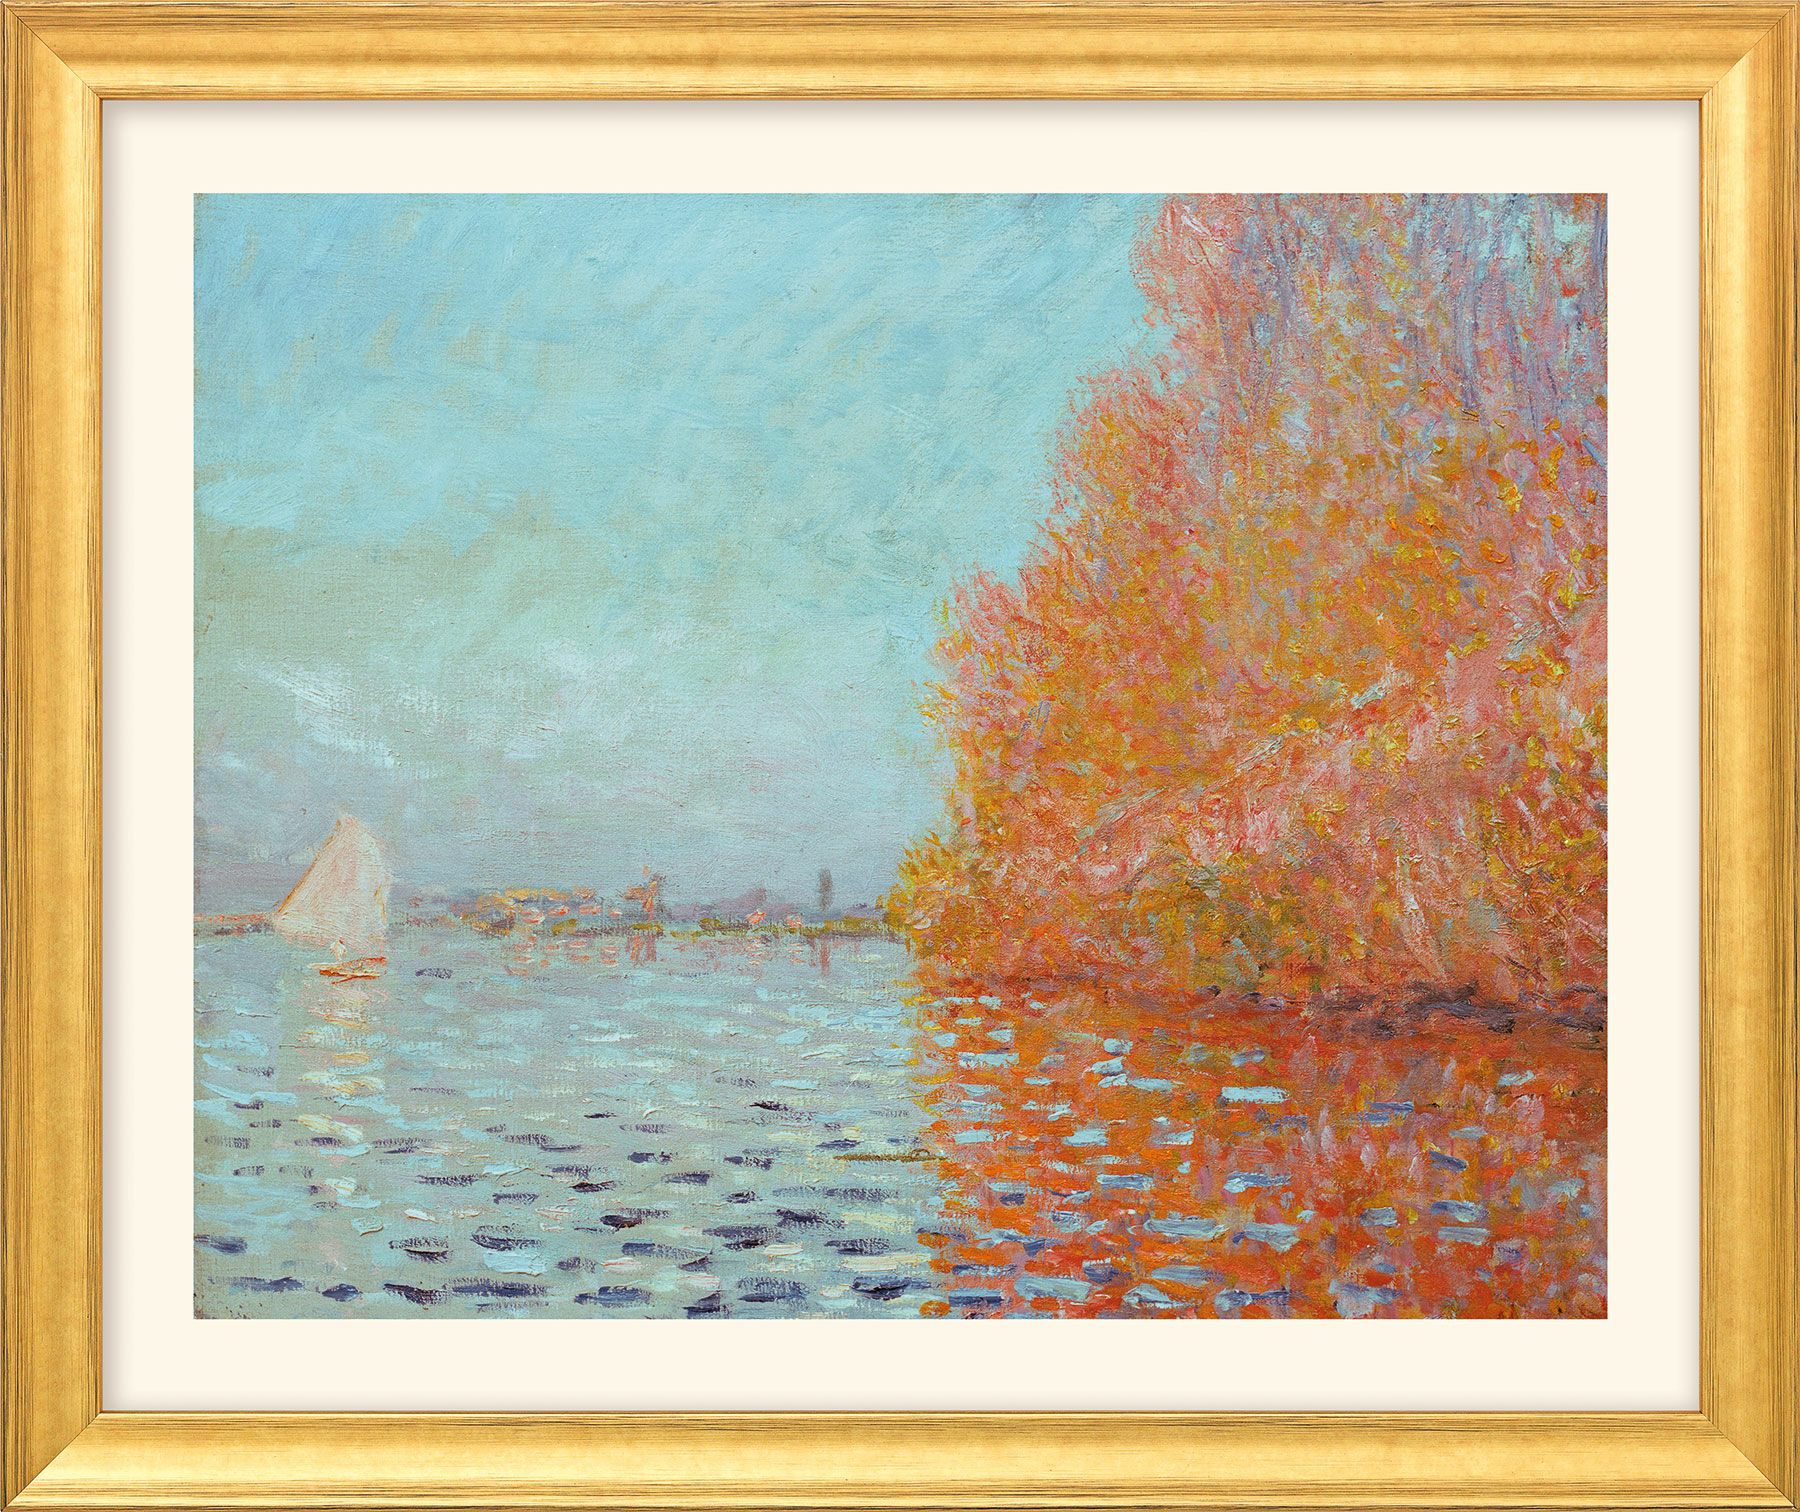 Picture "Argenteuil Basin with a Single Sailboat" (1874), golden framed version by Claude Monet